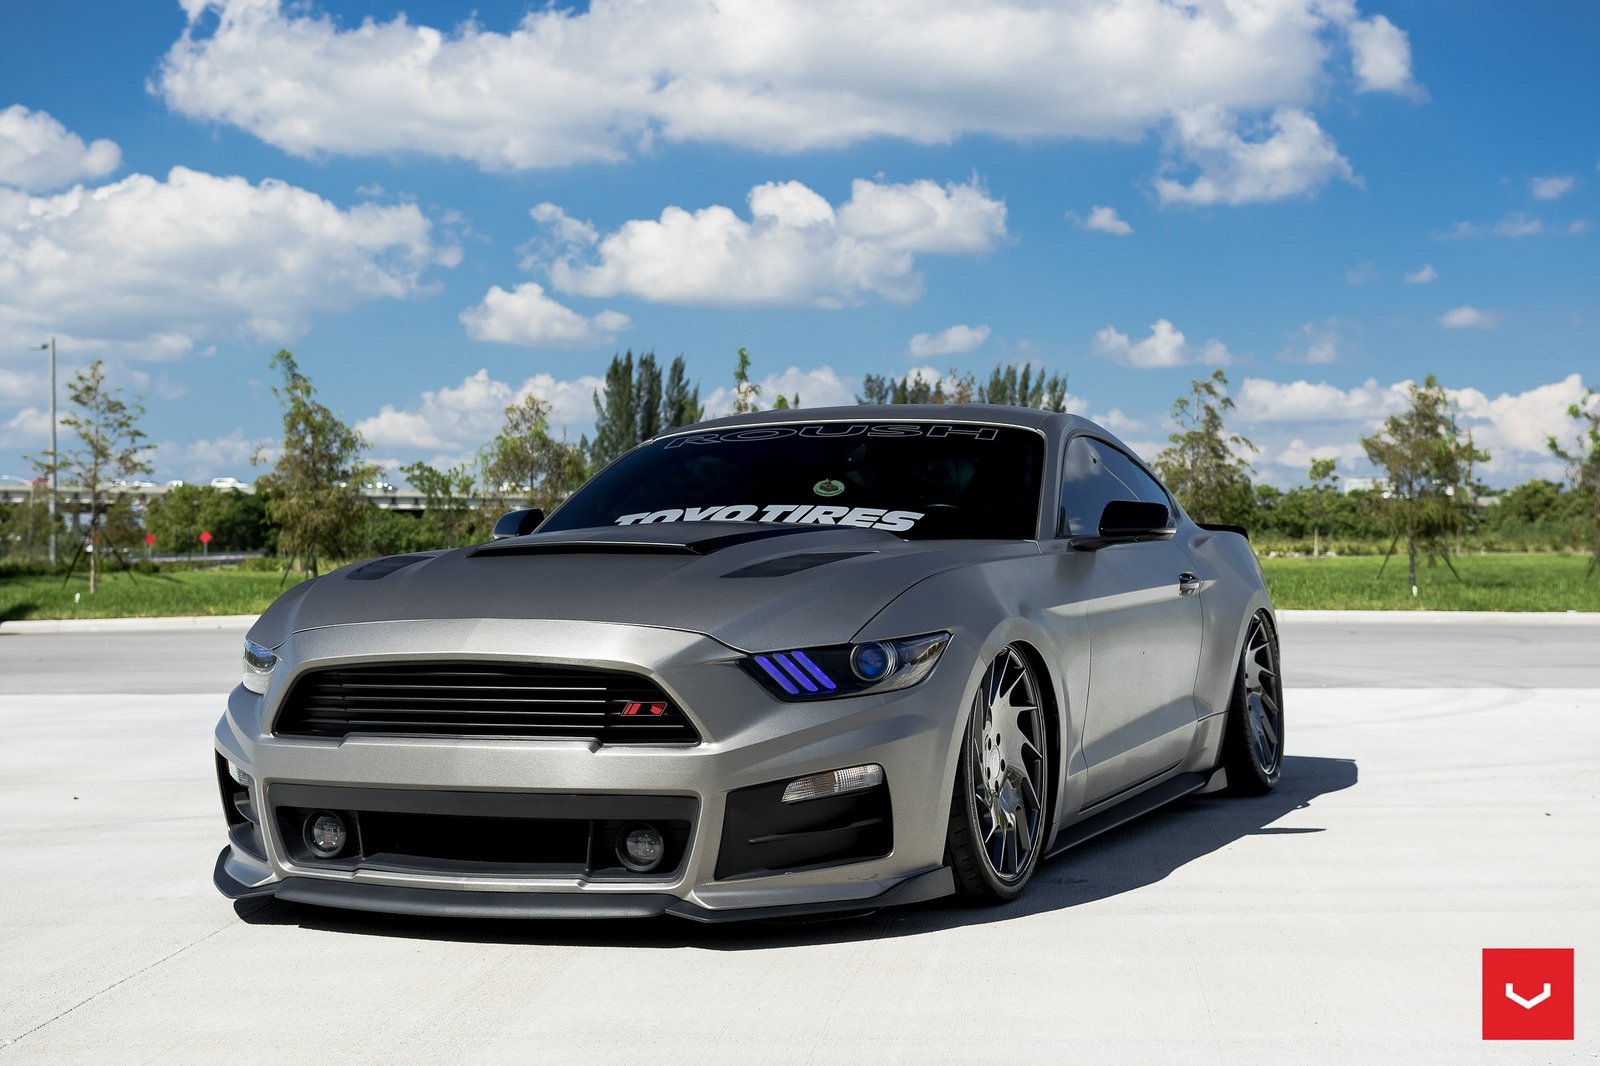 vossen, Wheels, 2015, Roush, Performance, Ford, Mustang, Coupe, Cars, Modified Wallpaper